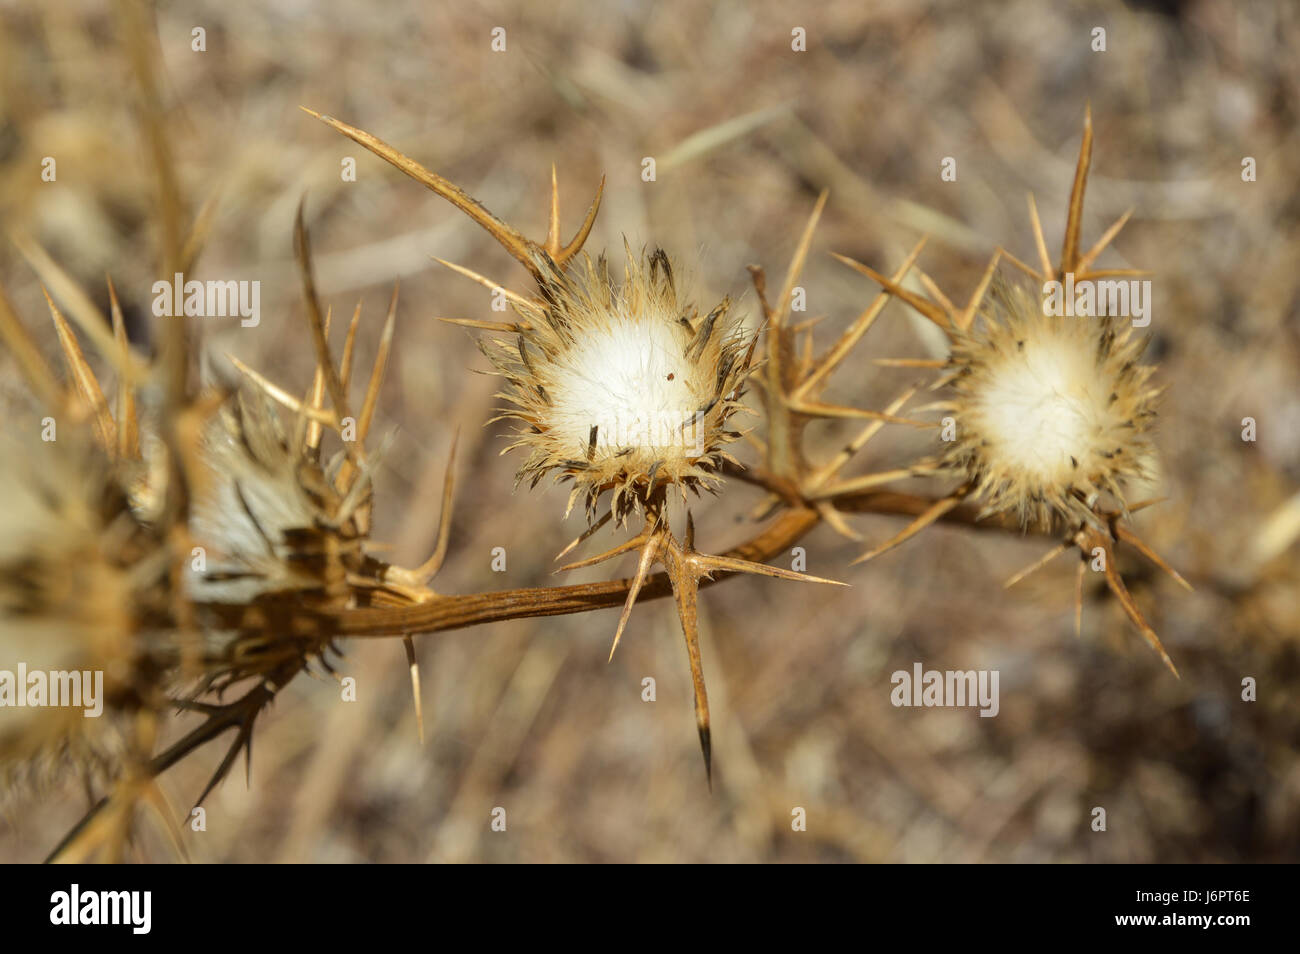 a close up macro detail of gold golden yellow wild pricky Carlina thistle  flowers with soft downy centres certers in dry arid desert ground Stock Photo